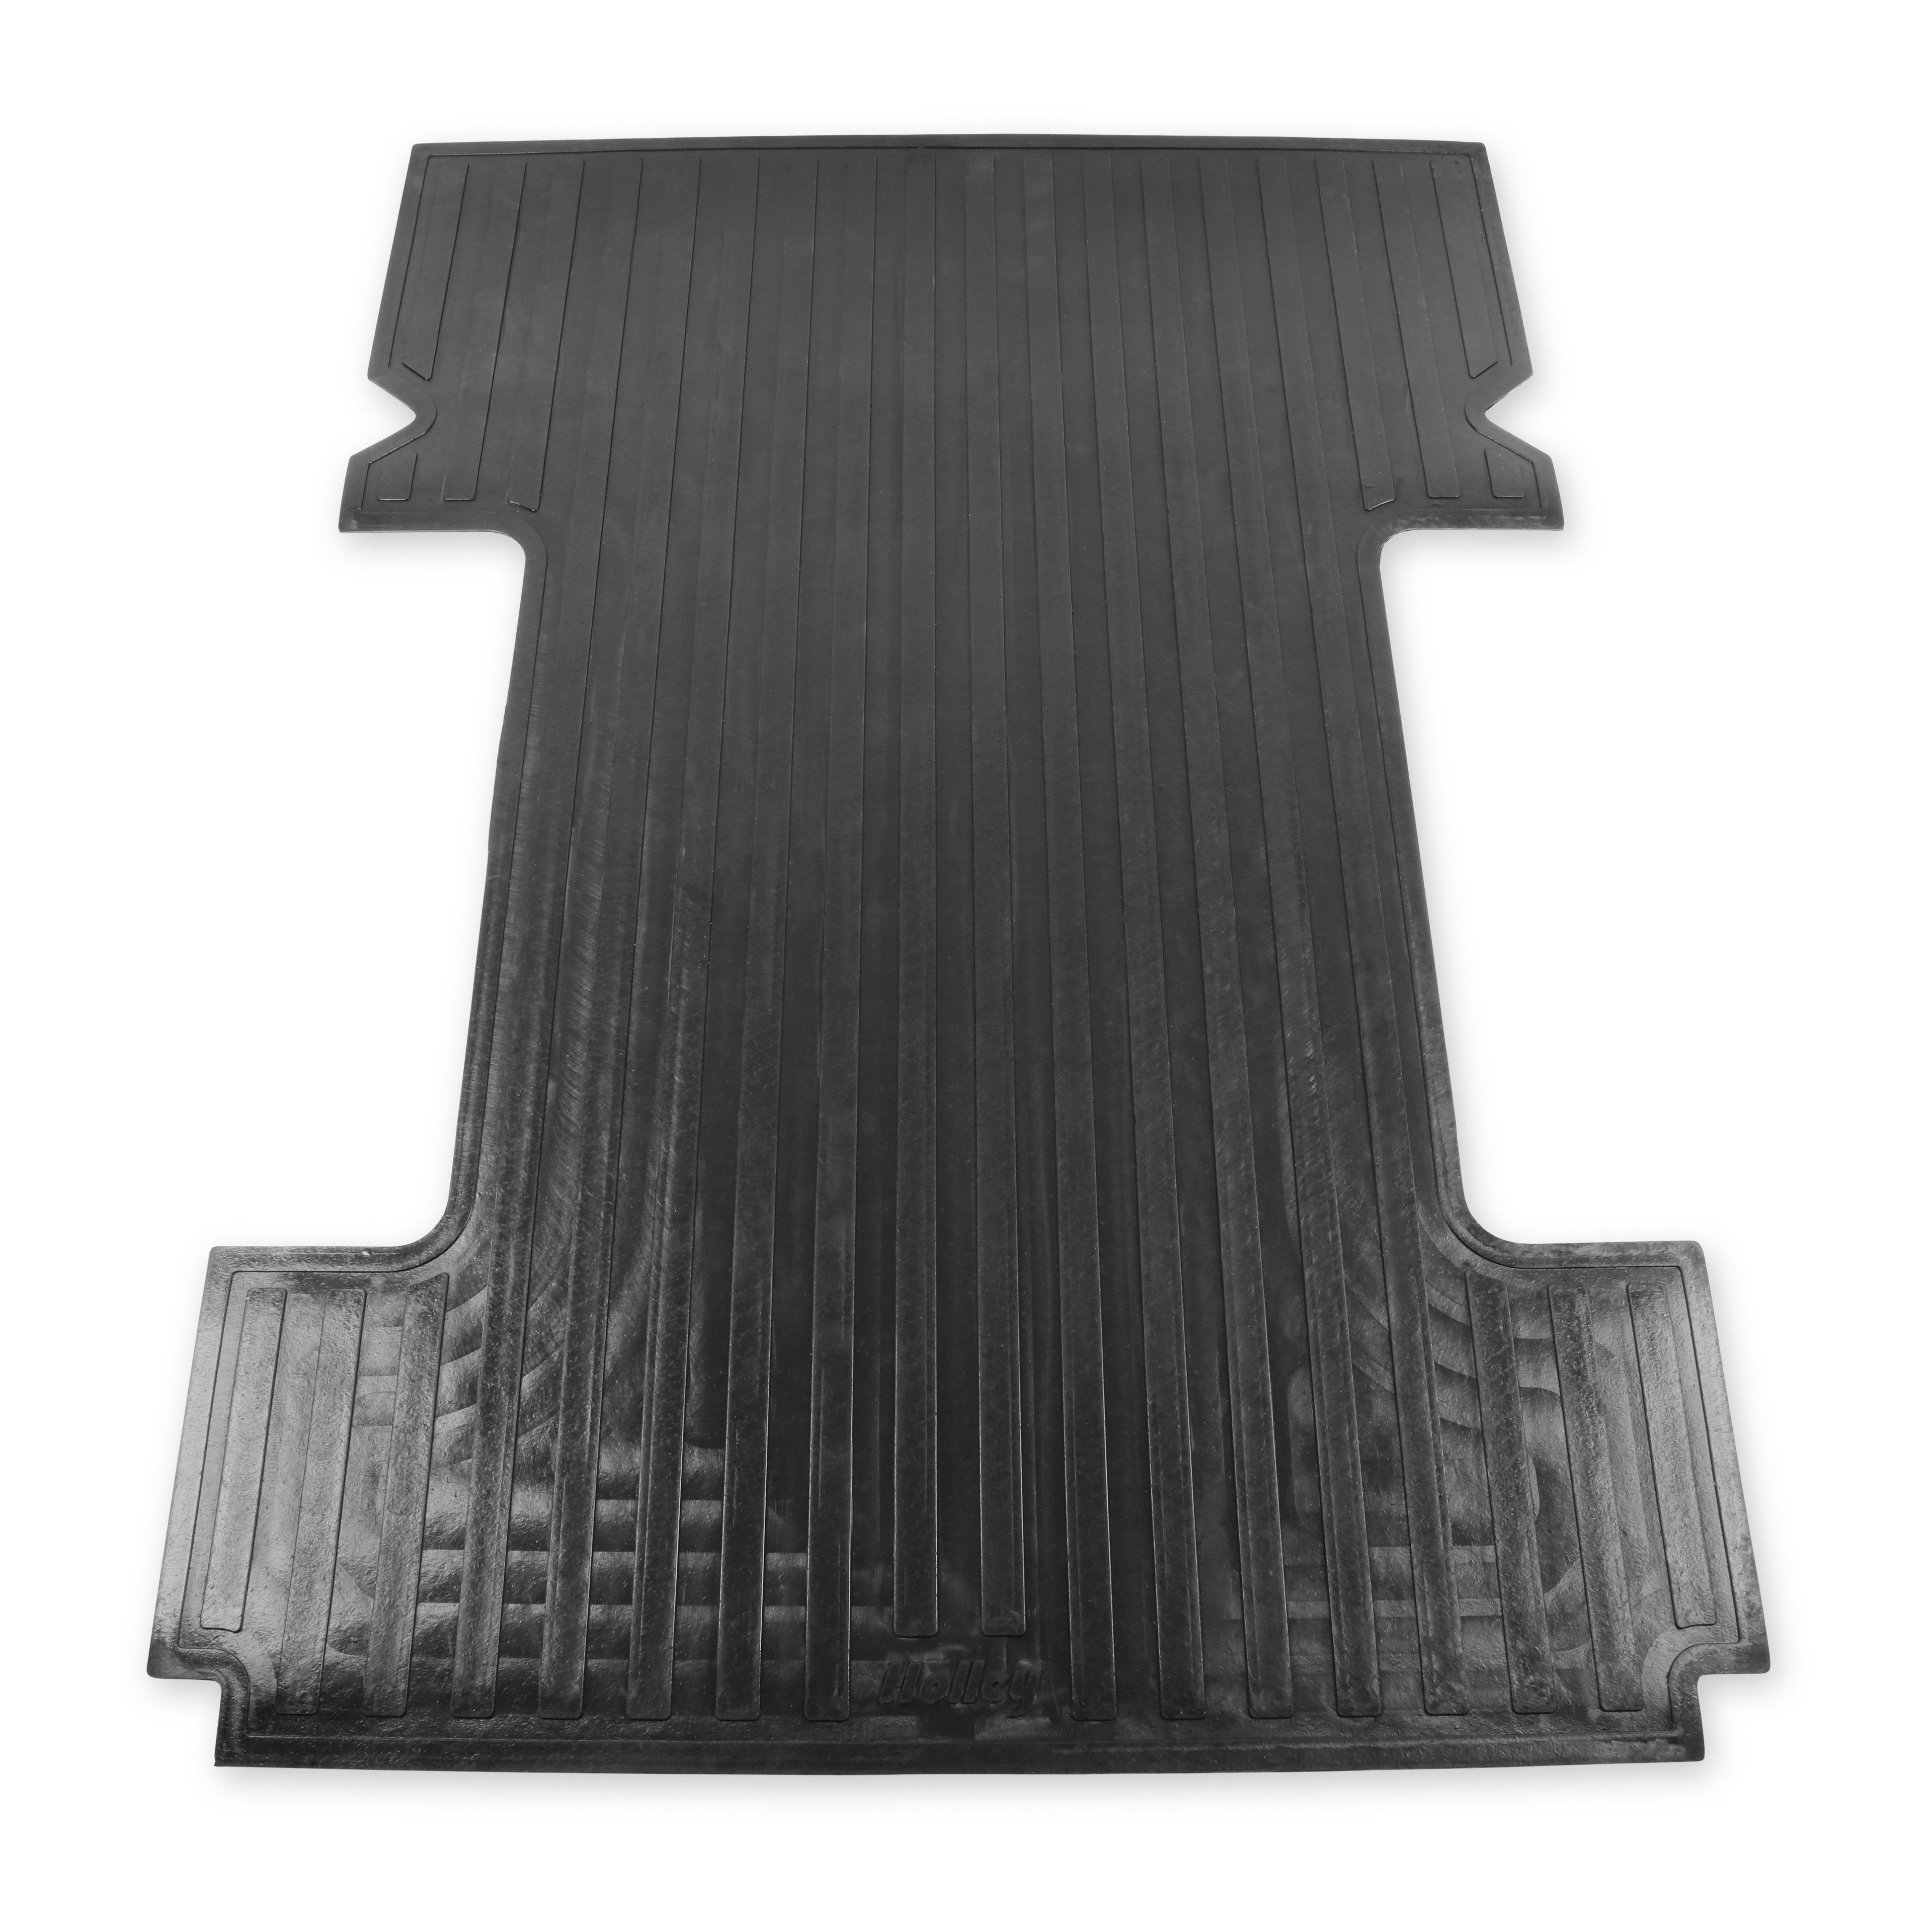 BROTHERS - TRUCK BED MAT pn 06-7387lbm